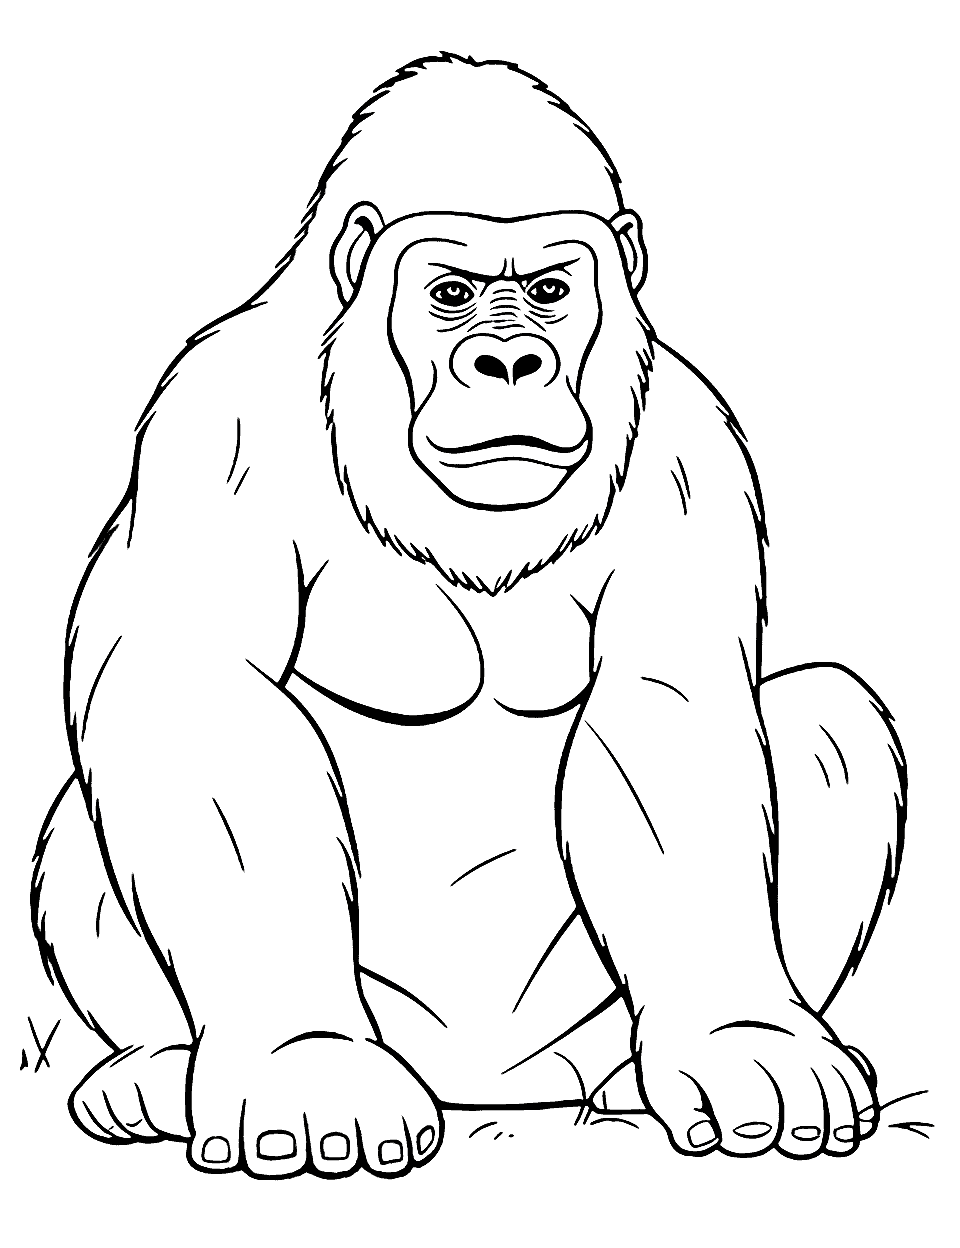 Wise Gorilla Animal Coloring Page - A wise and gentle gorilla sitting in a thoughtful pose.